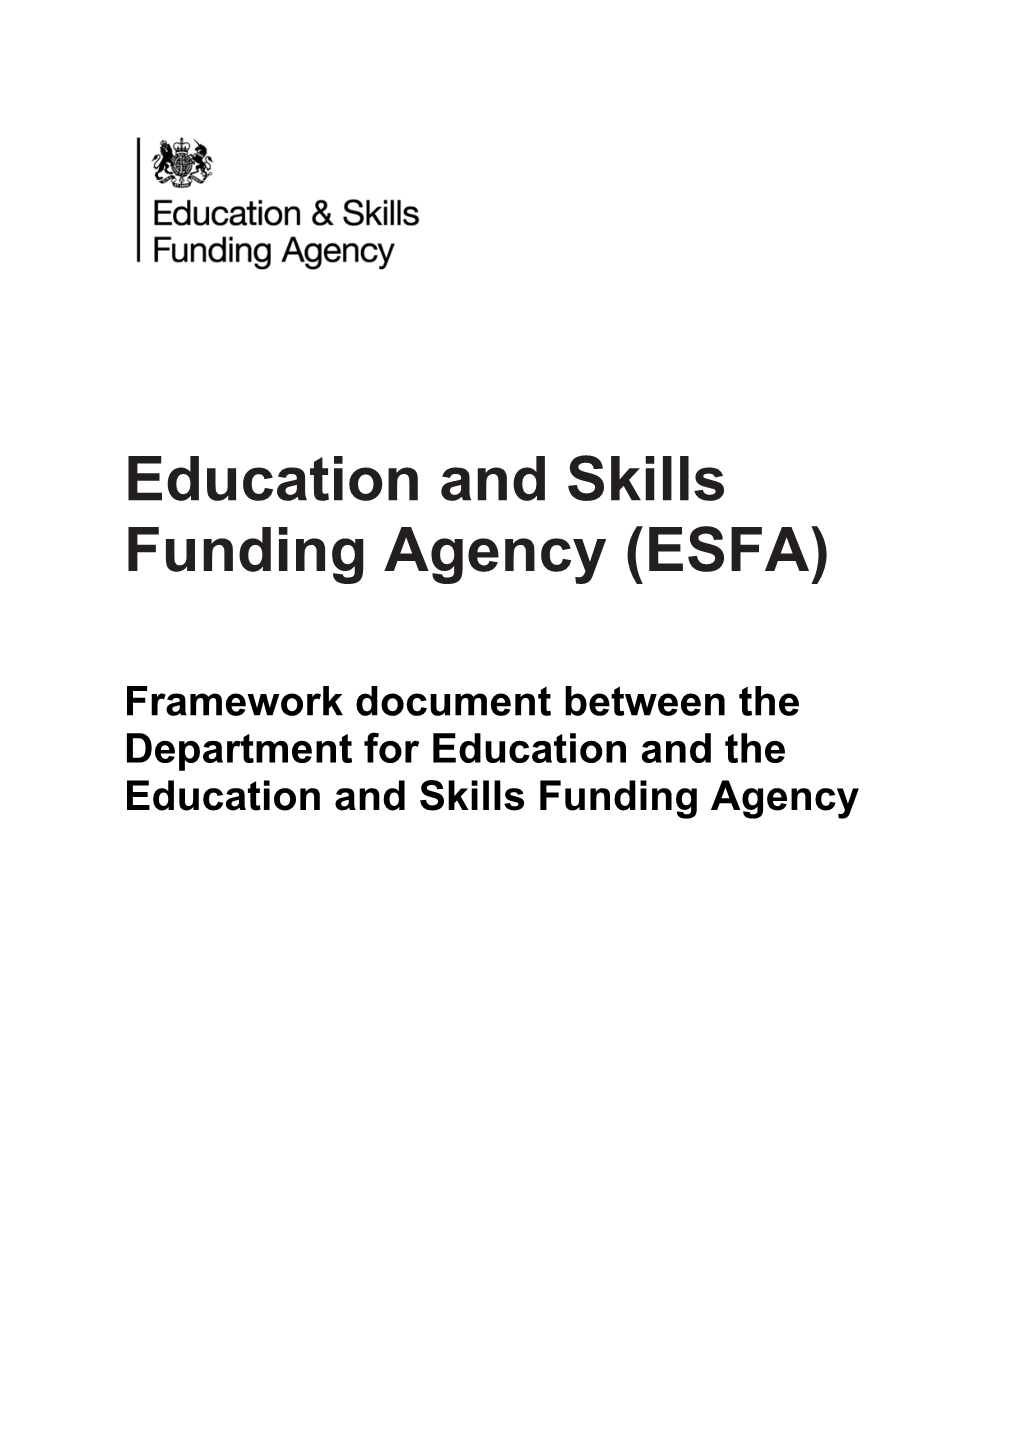 Framework Document Between the Department for Education and the Education and Skills Funding Agency